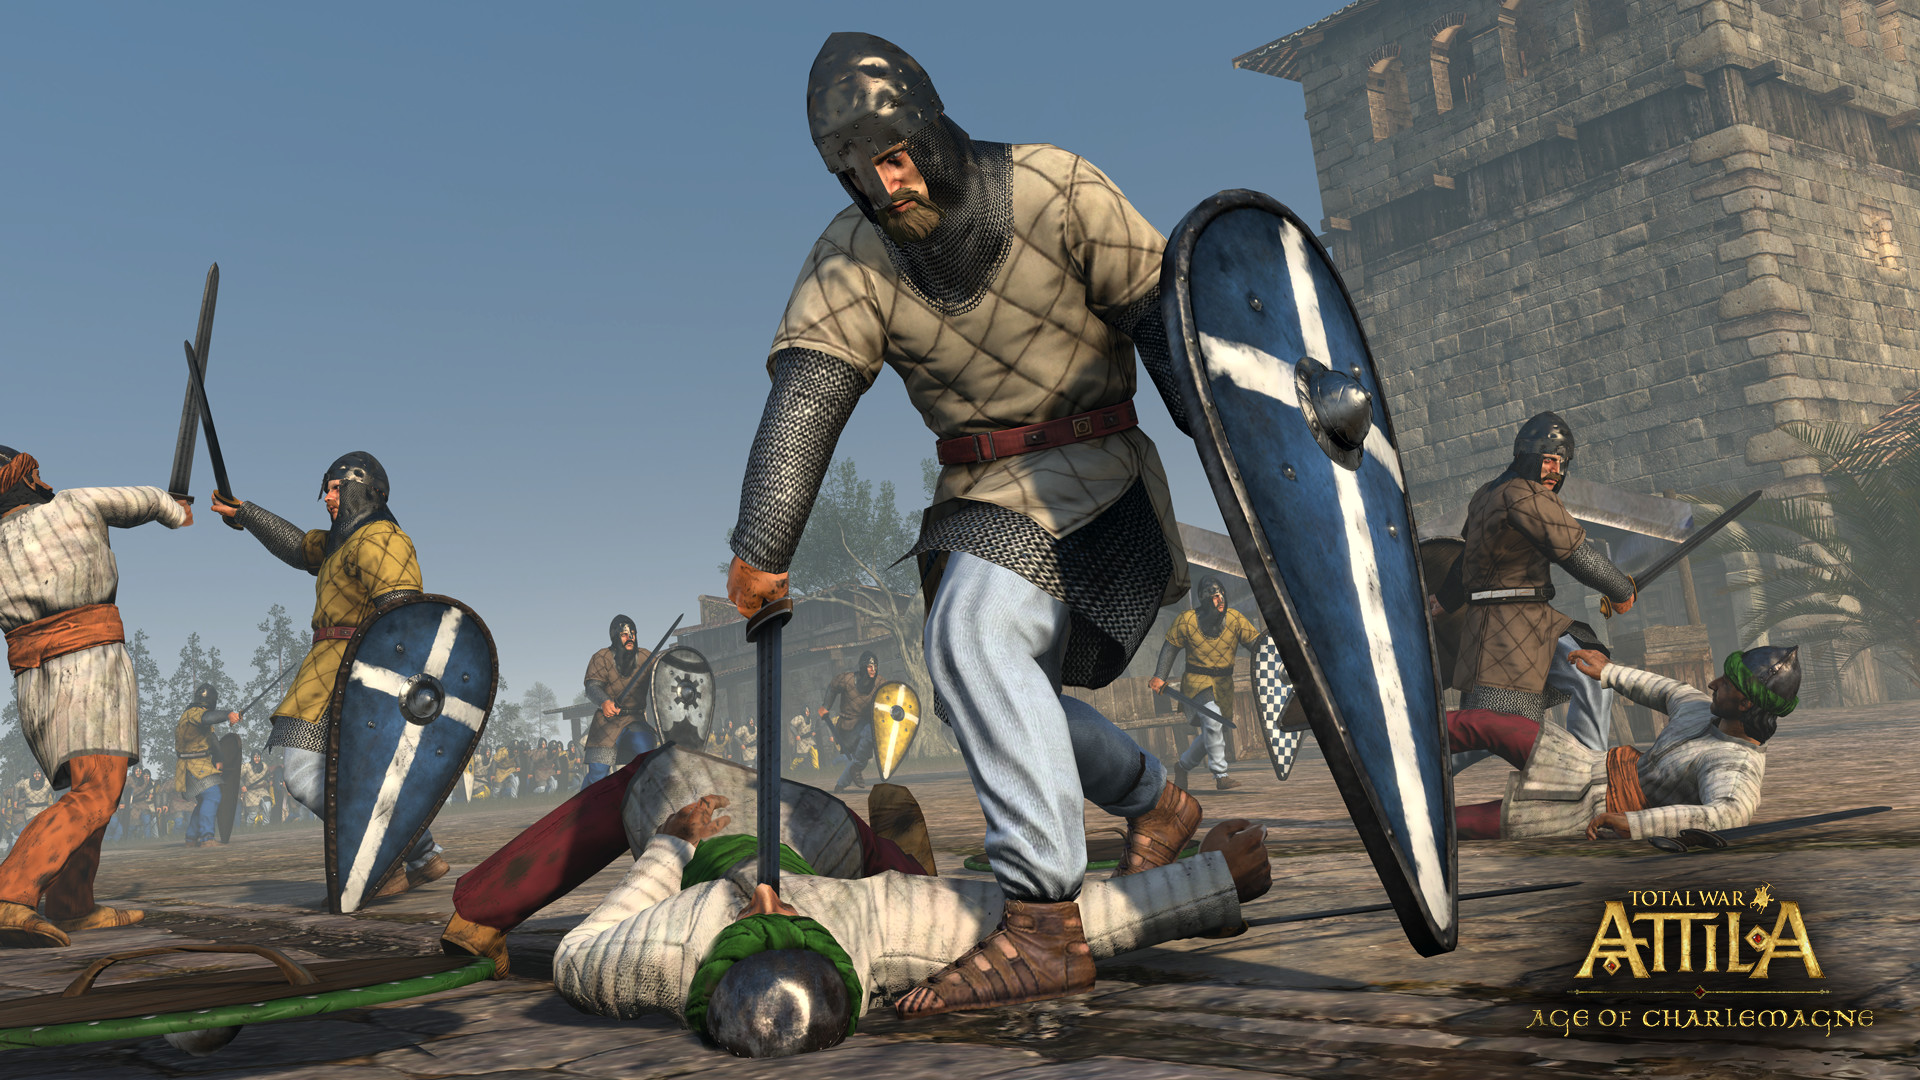 Total War: ATTILA - Age of Charlemagne Campaign Pack Featured Screenshot #1